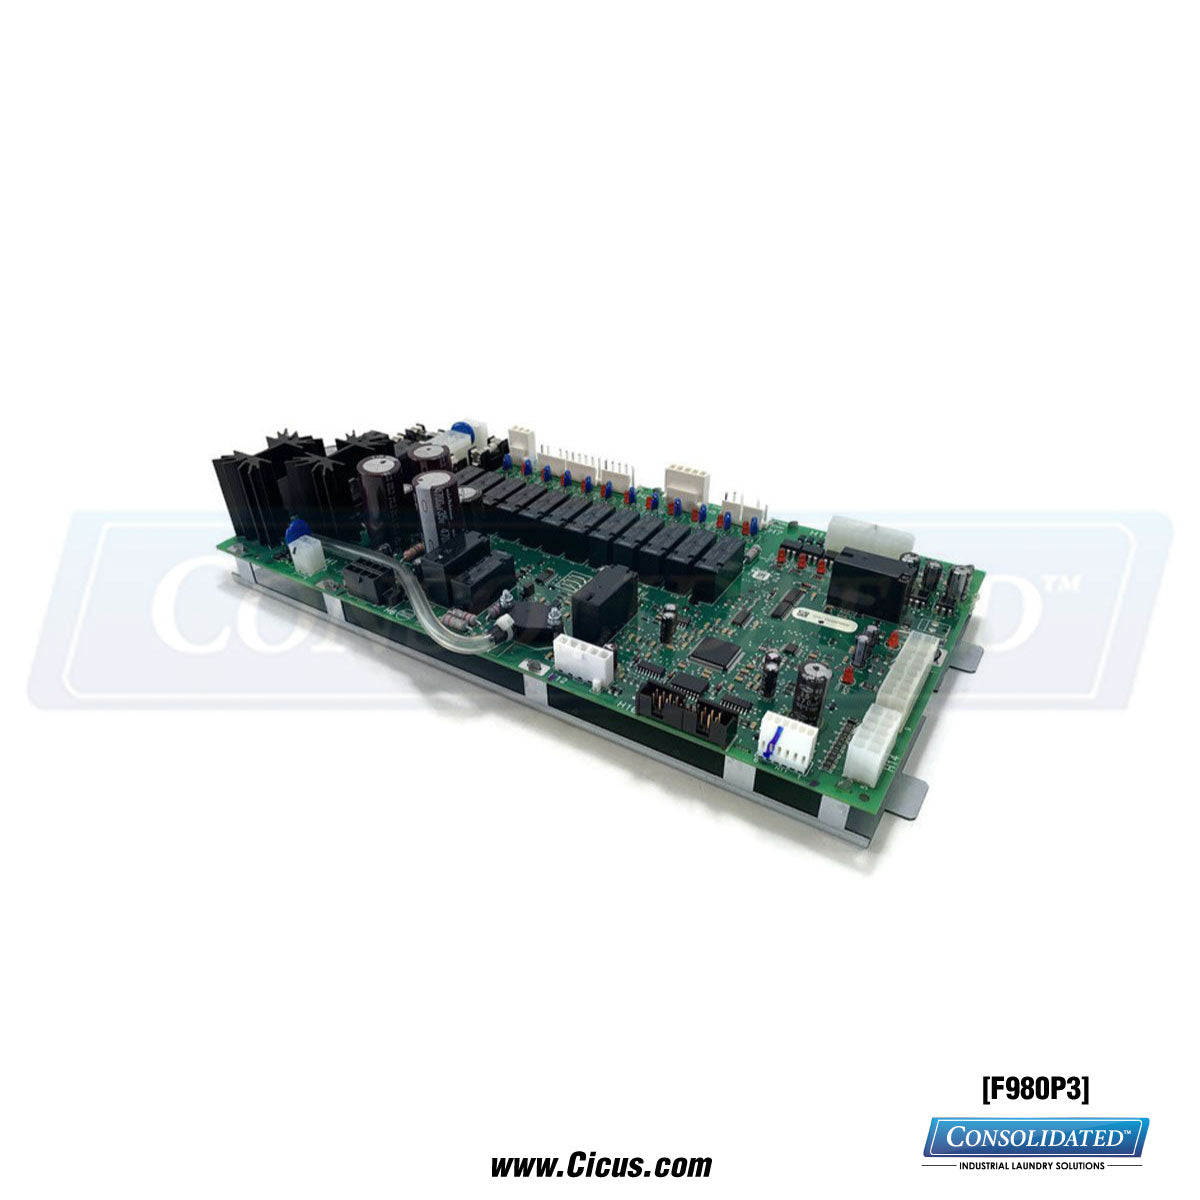 Alliance Laundry Systems Main Control Board [F980P3] - Top View